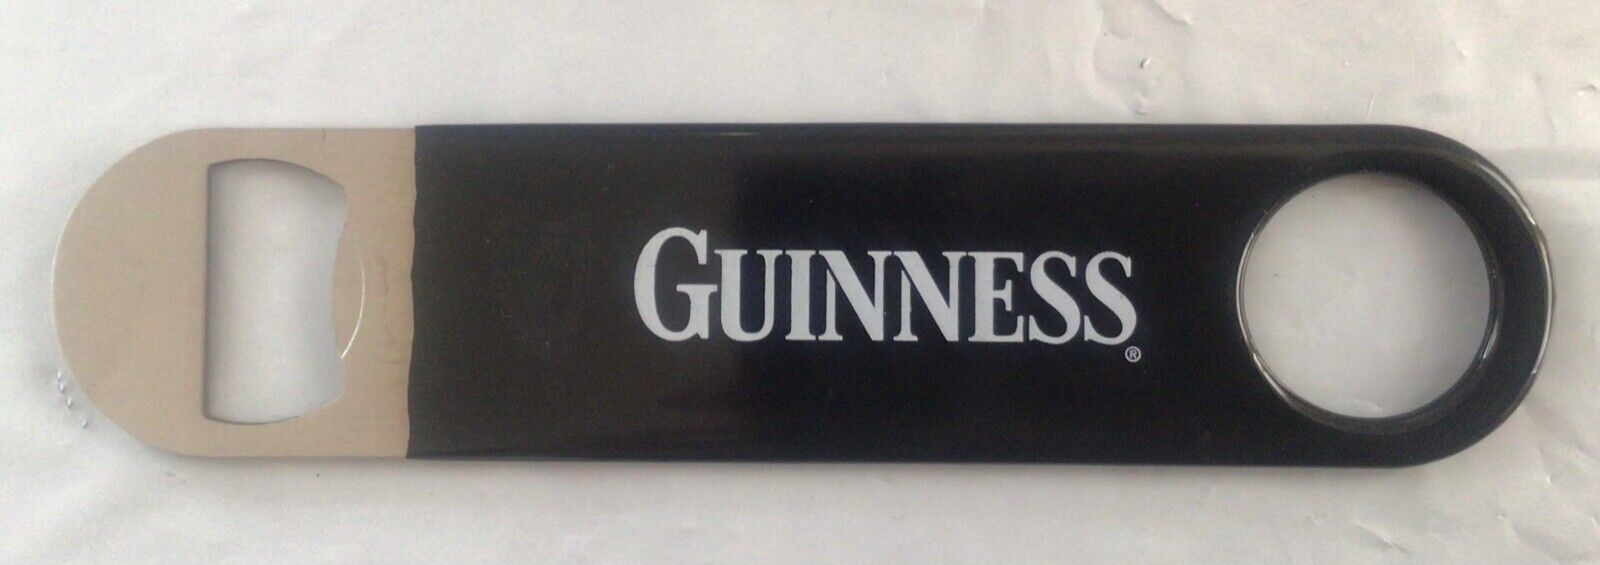 BRAND NEW Classic Heavy Duty Official Product GUINNESS Beer Bottle opener 7 1/8\